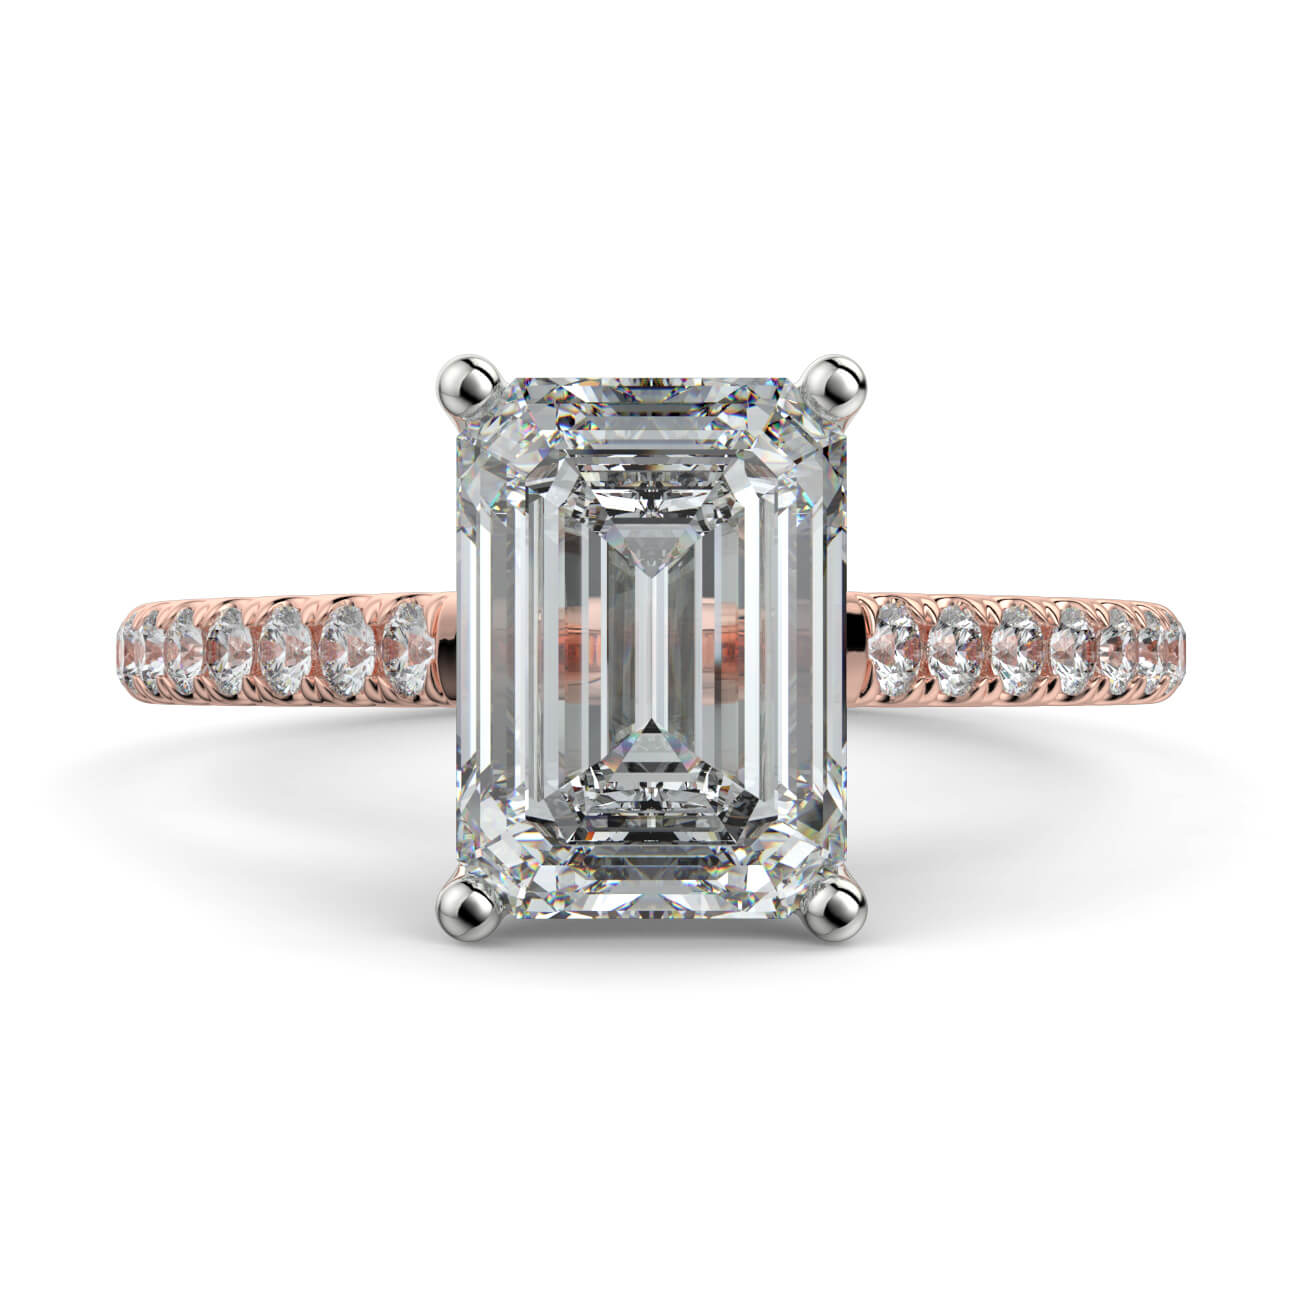 Emerald Cut diamond cathedral engagement ring in rose and white gold – Australian Diamond Network